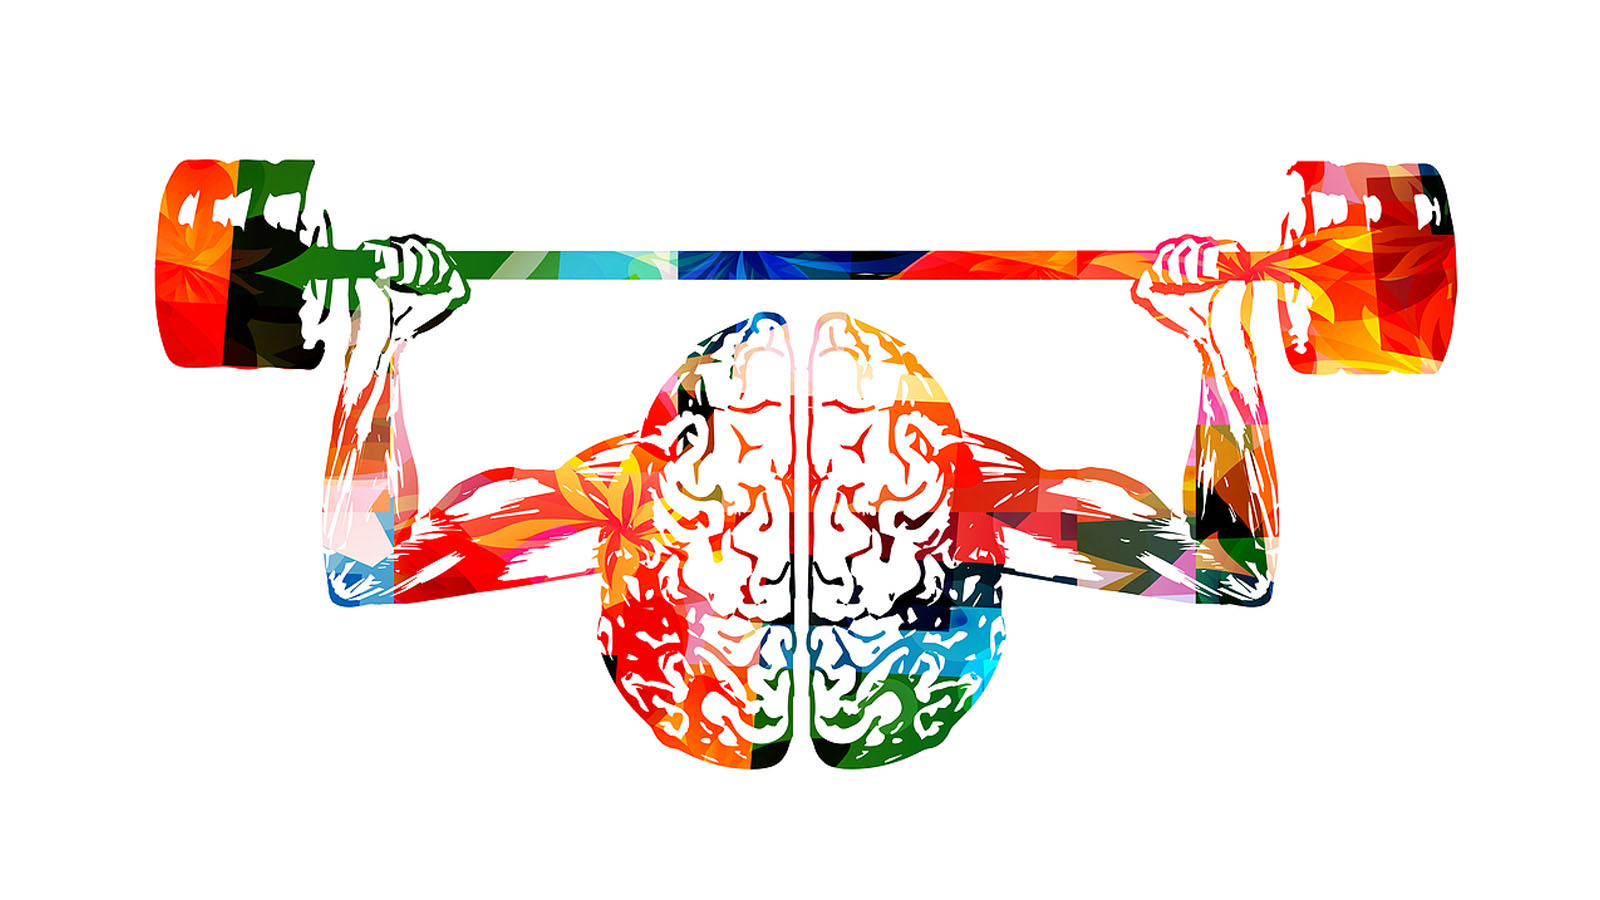 An illustration of a brain lifting weights, representing brain training.